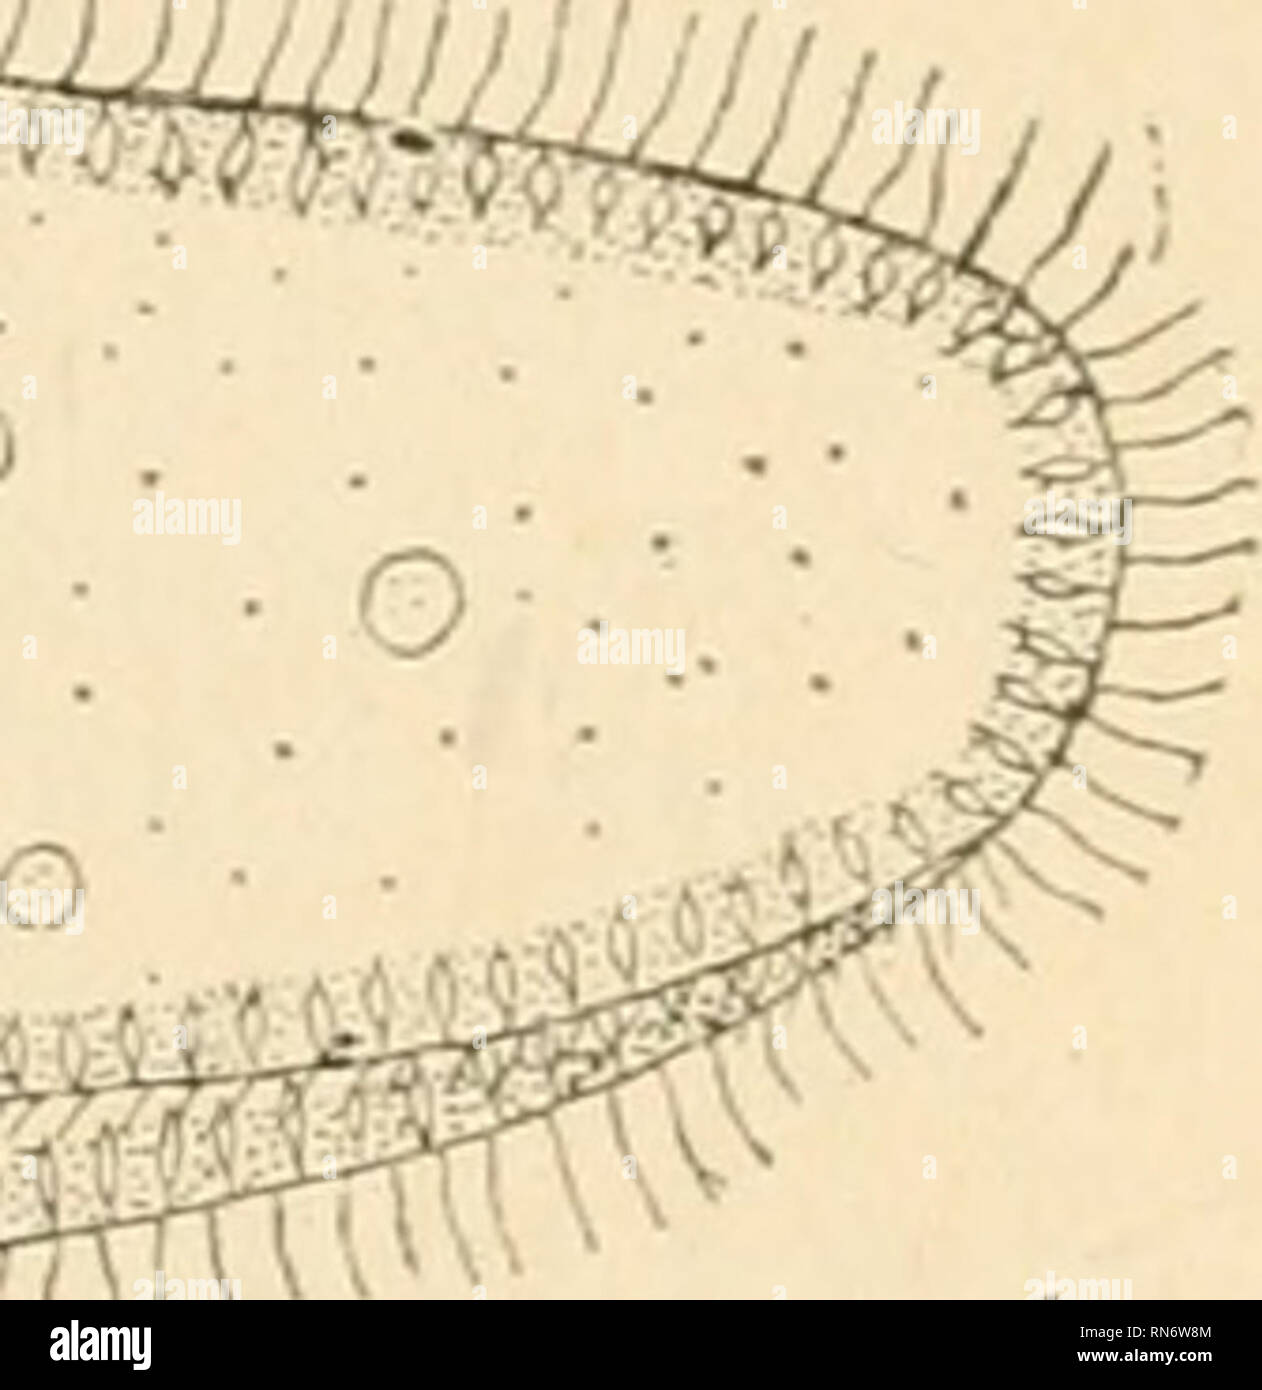 . Animal behaviour. Animals behavior. /JTiimflinuidiMi Fig. 1.—Paramecium.. the particles into and down the tube, and on reaching its iuner end these particles burst through into the semi-fluid sub- stance, and circulate therein. Just above the funnel there are two bean-like bodies, the larger of which is known as the macronucleus, the smaller as the micronucleus. The process of multiplication is by &quot;fission,&quot; or the division of each Paramecium into two similar animalcules. Not infrequently, however, two Paramecia may be seen to approach each other and come together, funnel to funnel Stock Photo